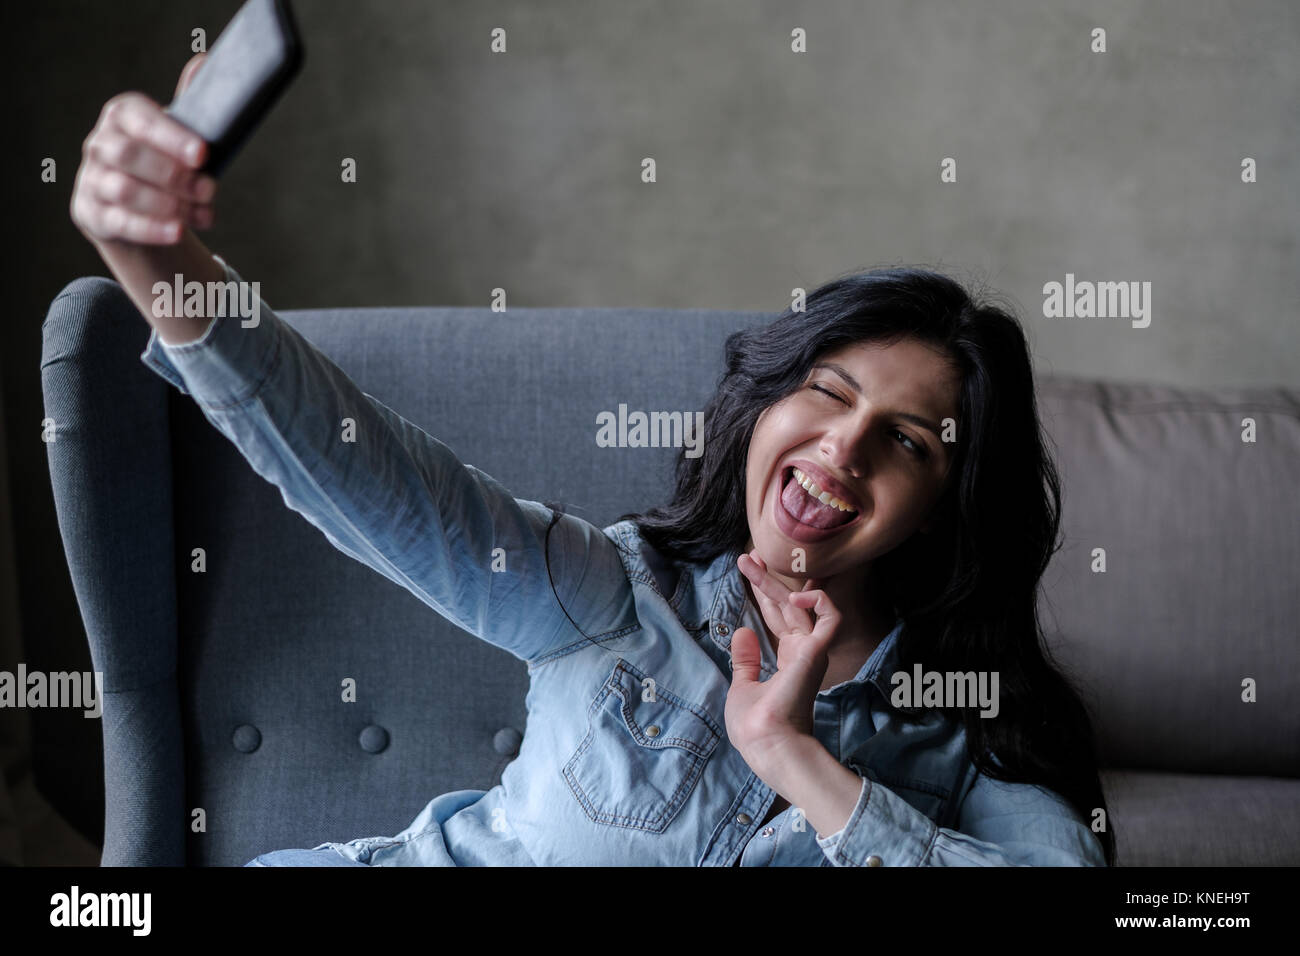 Woman sitting in a chair taking a selfie Stock Photo